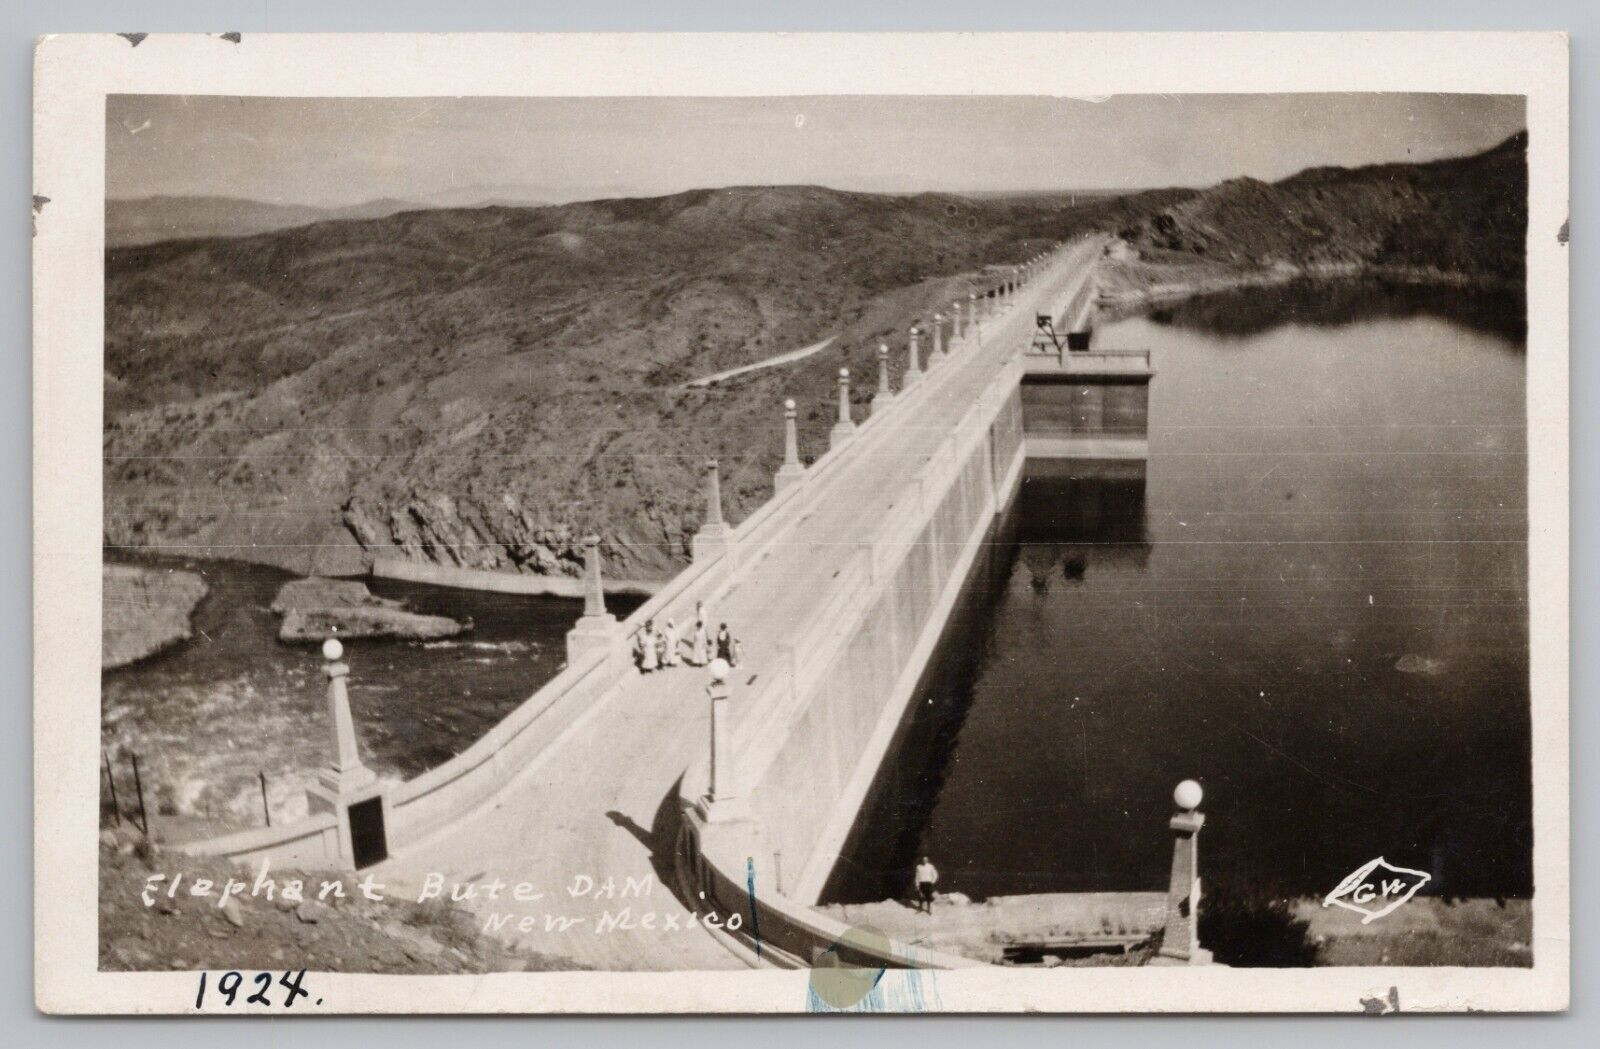 RPPC People on Elephant Bute Dam in New Mexico c1920 Real Photo Postcard